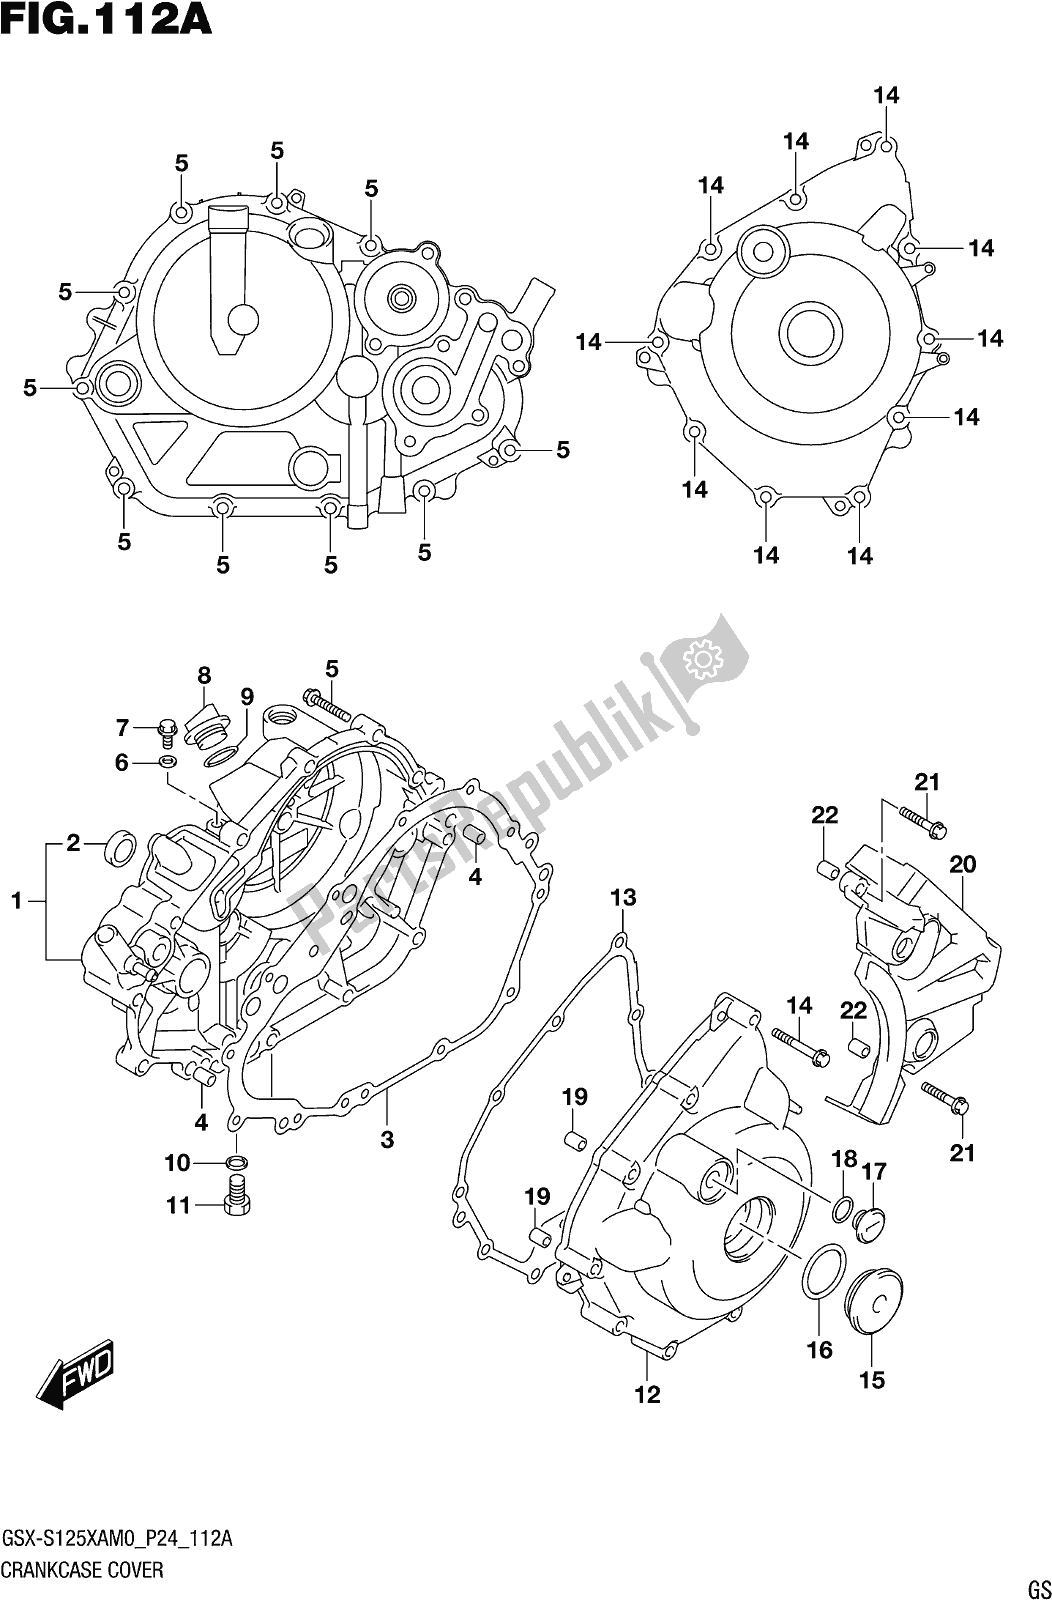 All parts for the Fig. 112a Crankcase Cover of the Suzuki Gsx-s 125 XA 2020